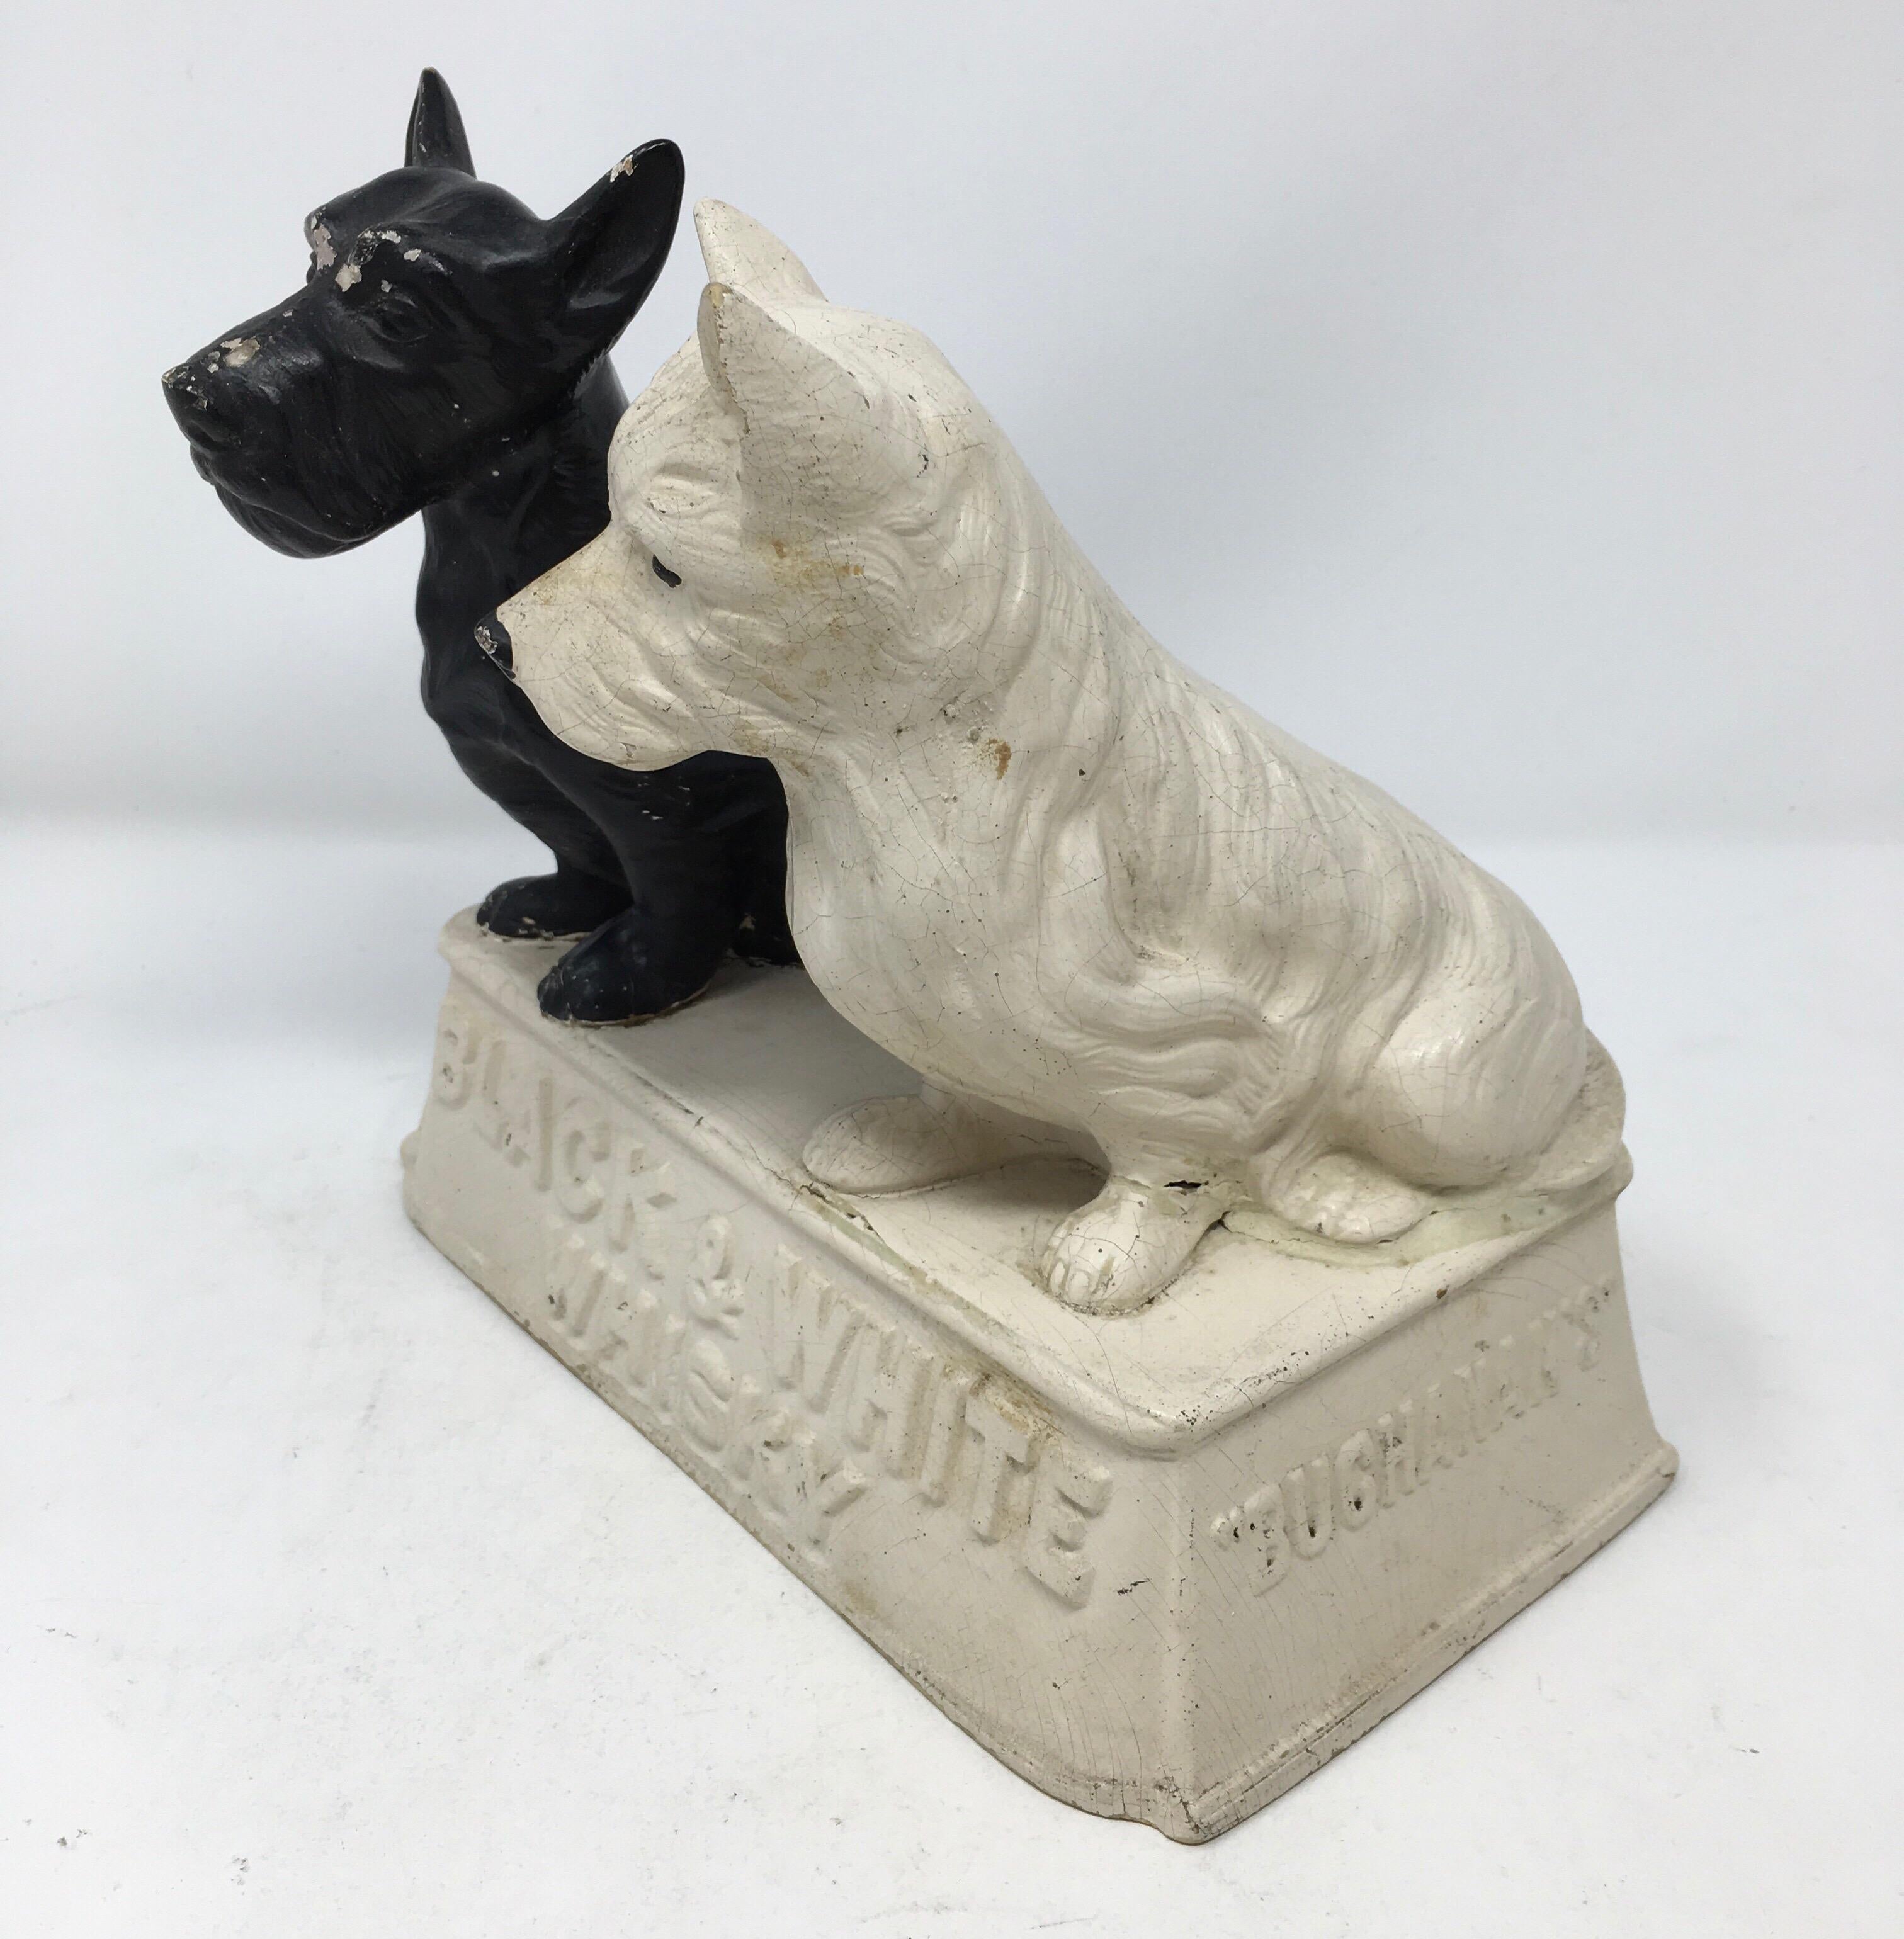 Rarely found black and white Whisky Scottie dogs bar counter advertising display circa 1950s. Great decorative item for your home bar or for the collector.